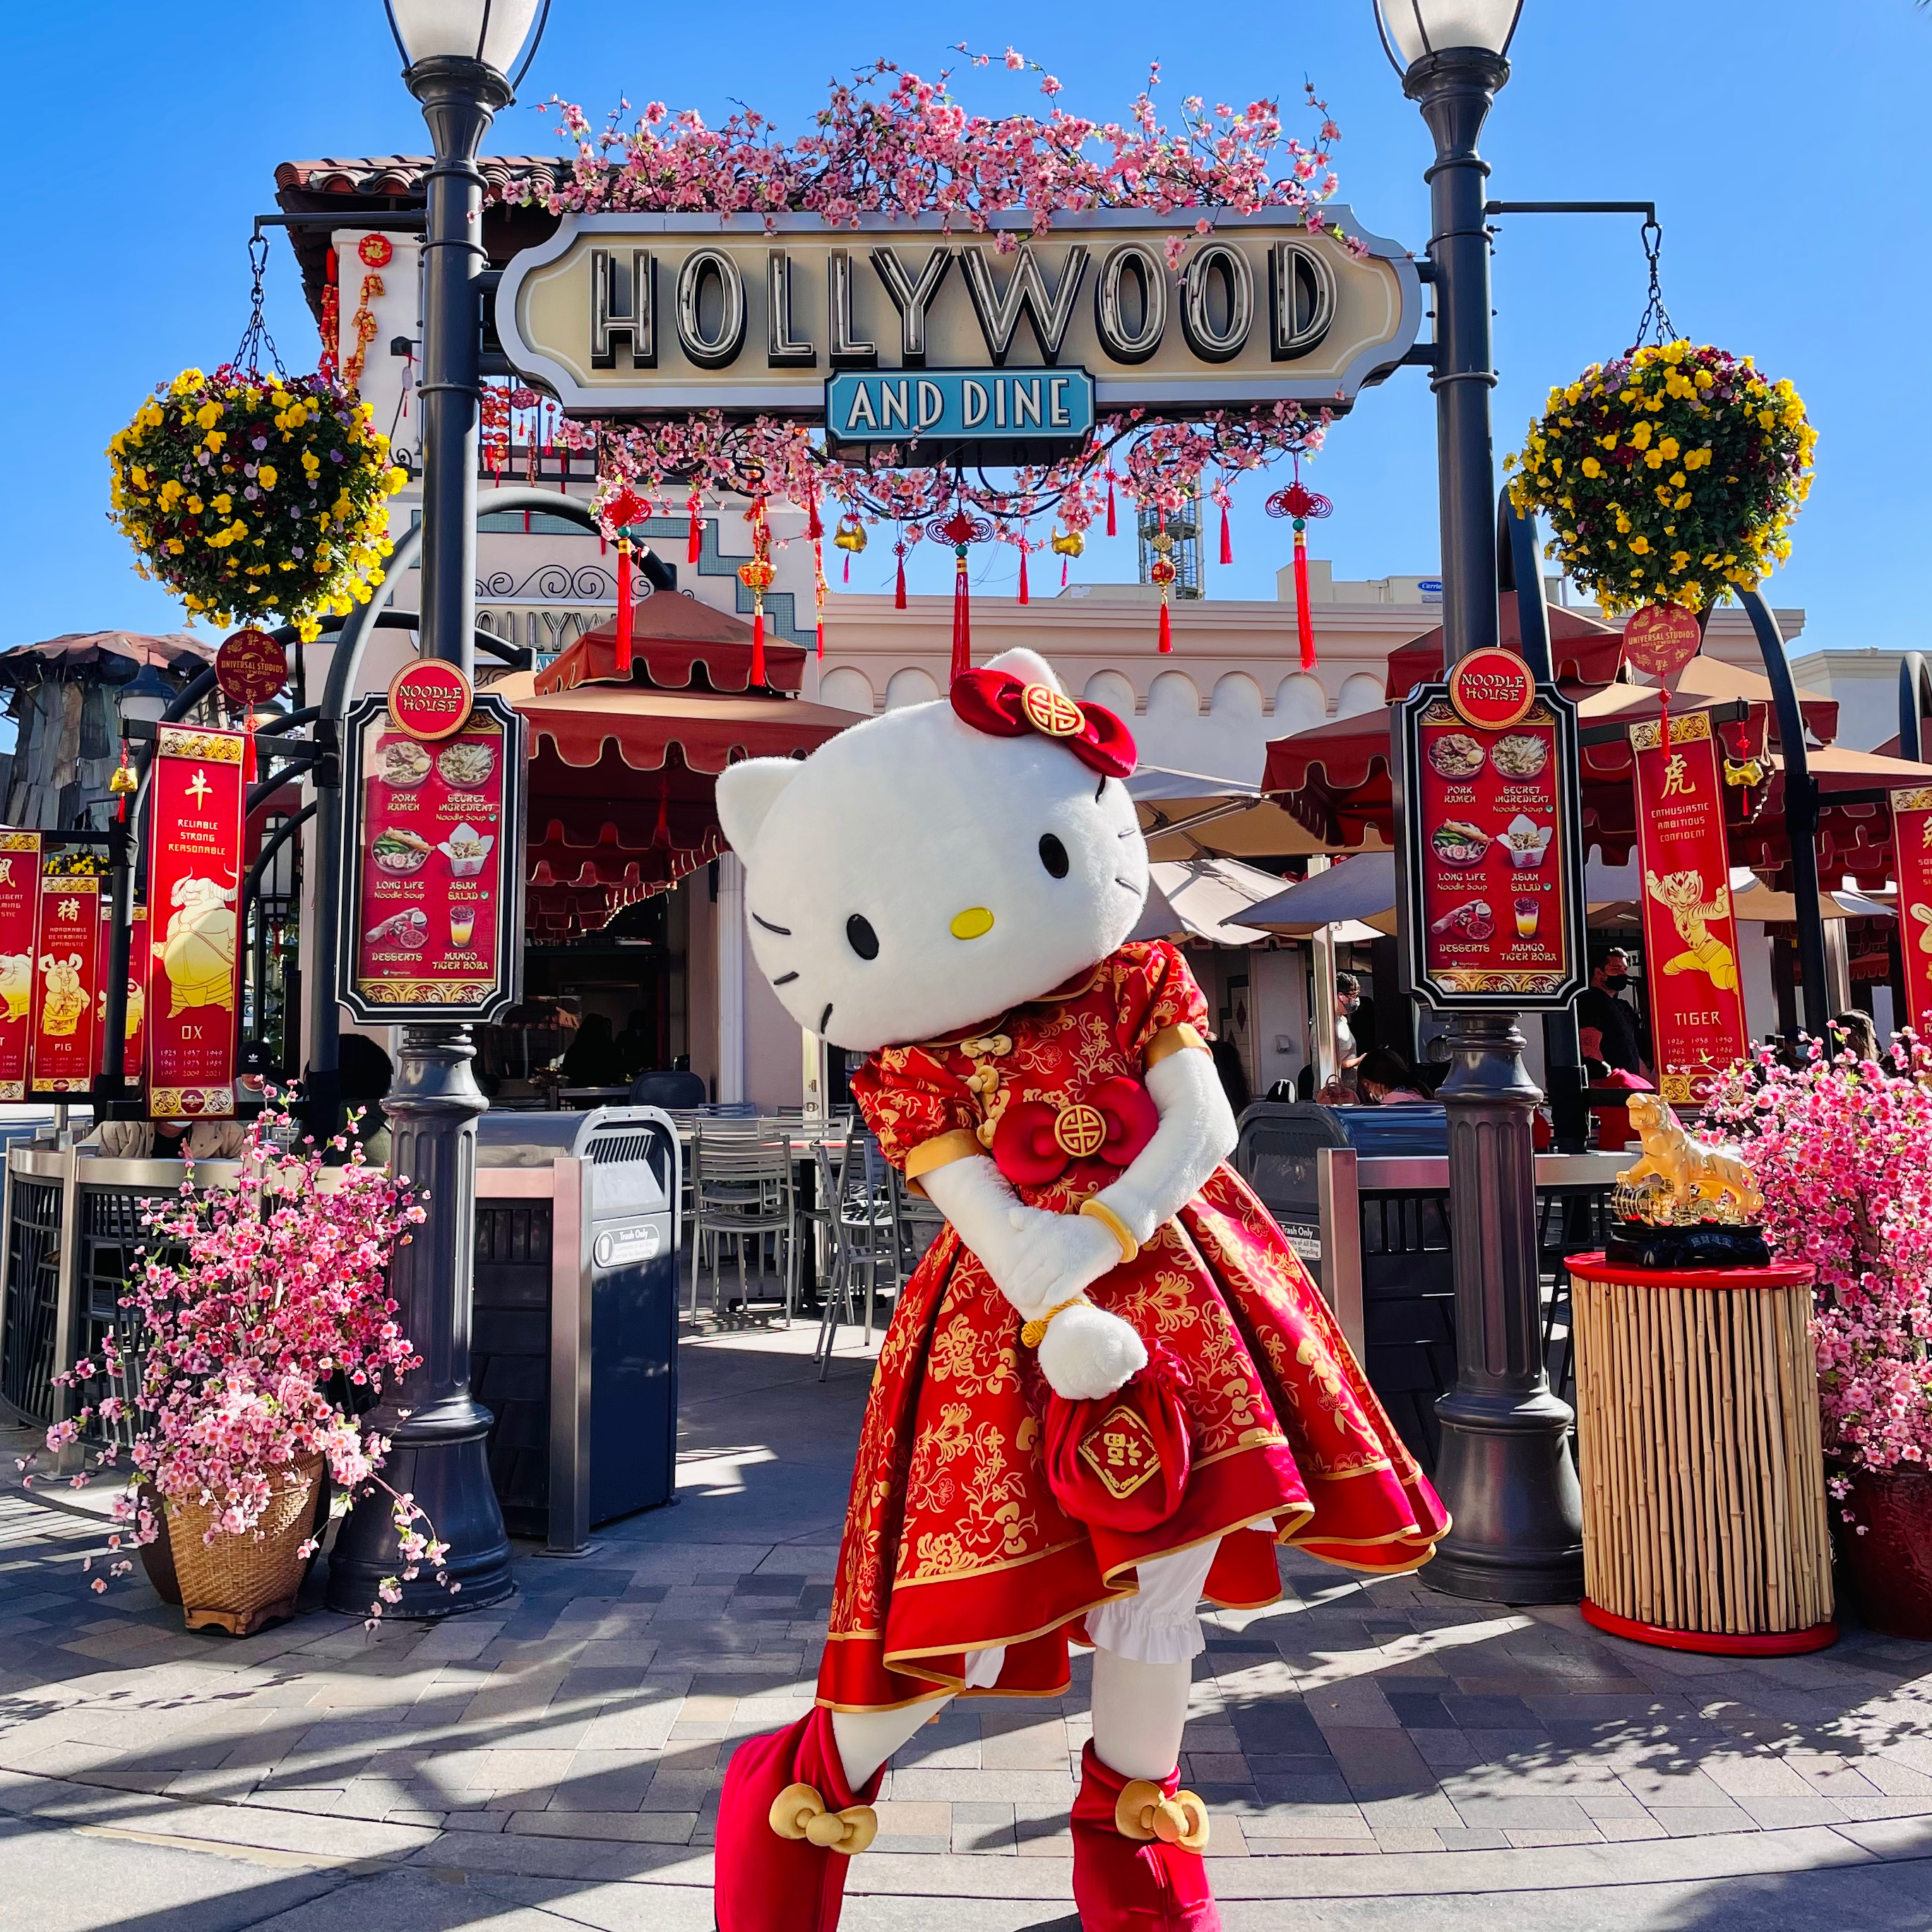 New Hello Kitty Loungefly Wallet Arrives at Universal Orlando